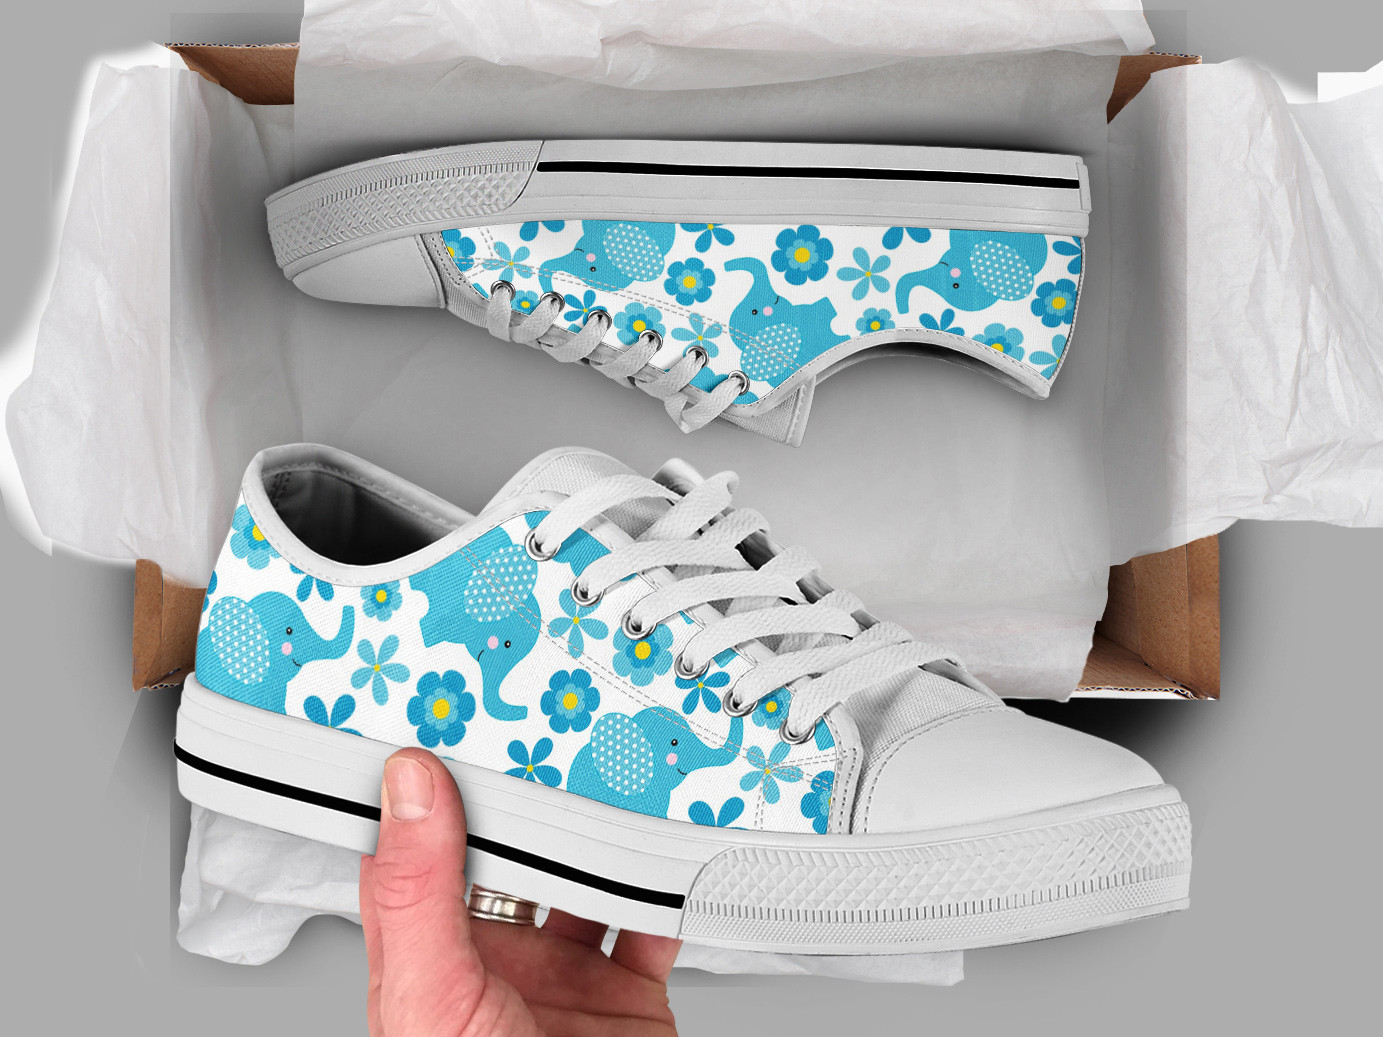 Floral Elephant Shoes | Custom Low Tops Sneakers For Kids & Adults